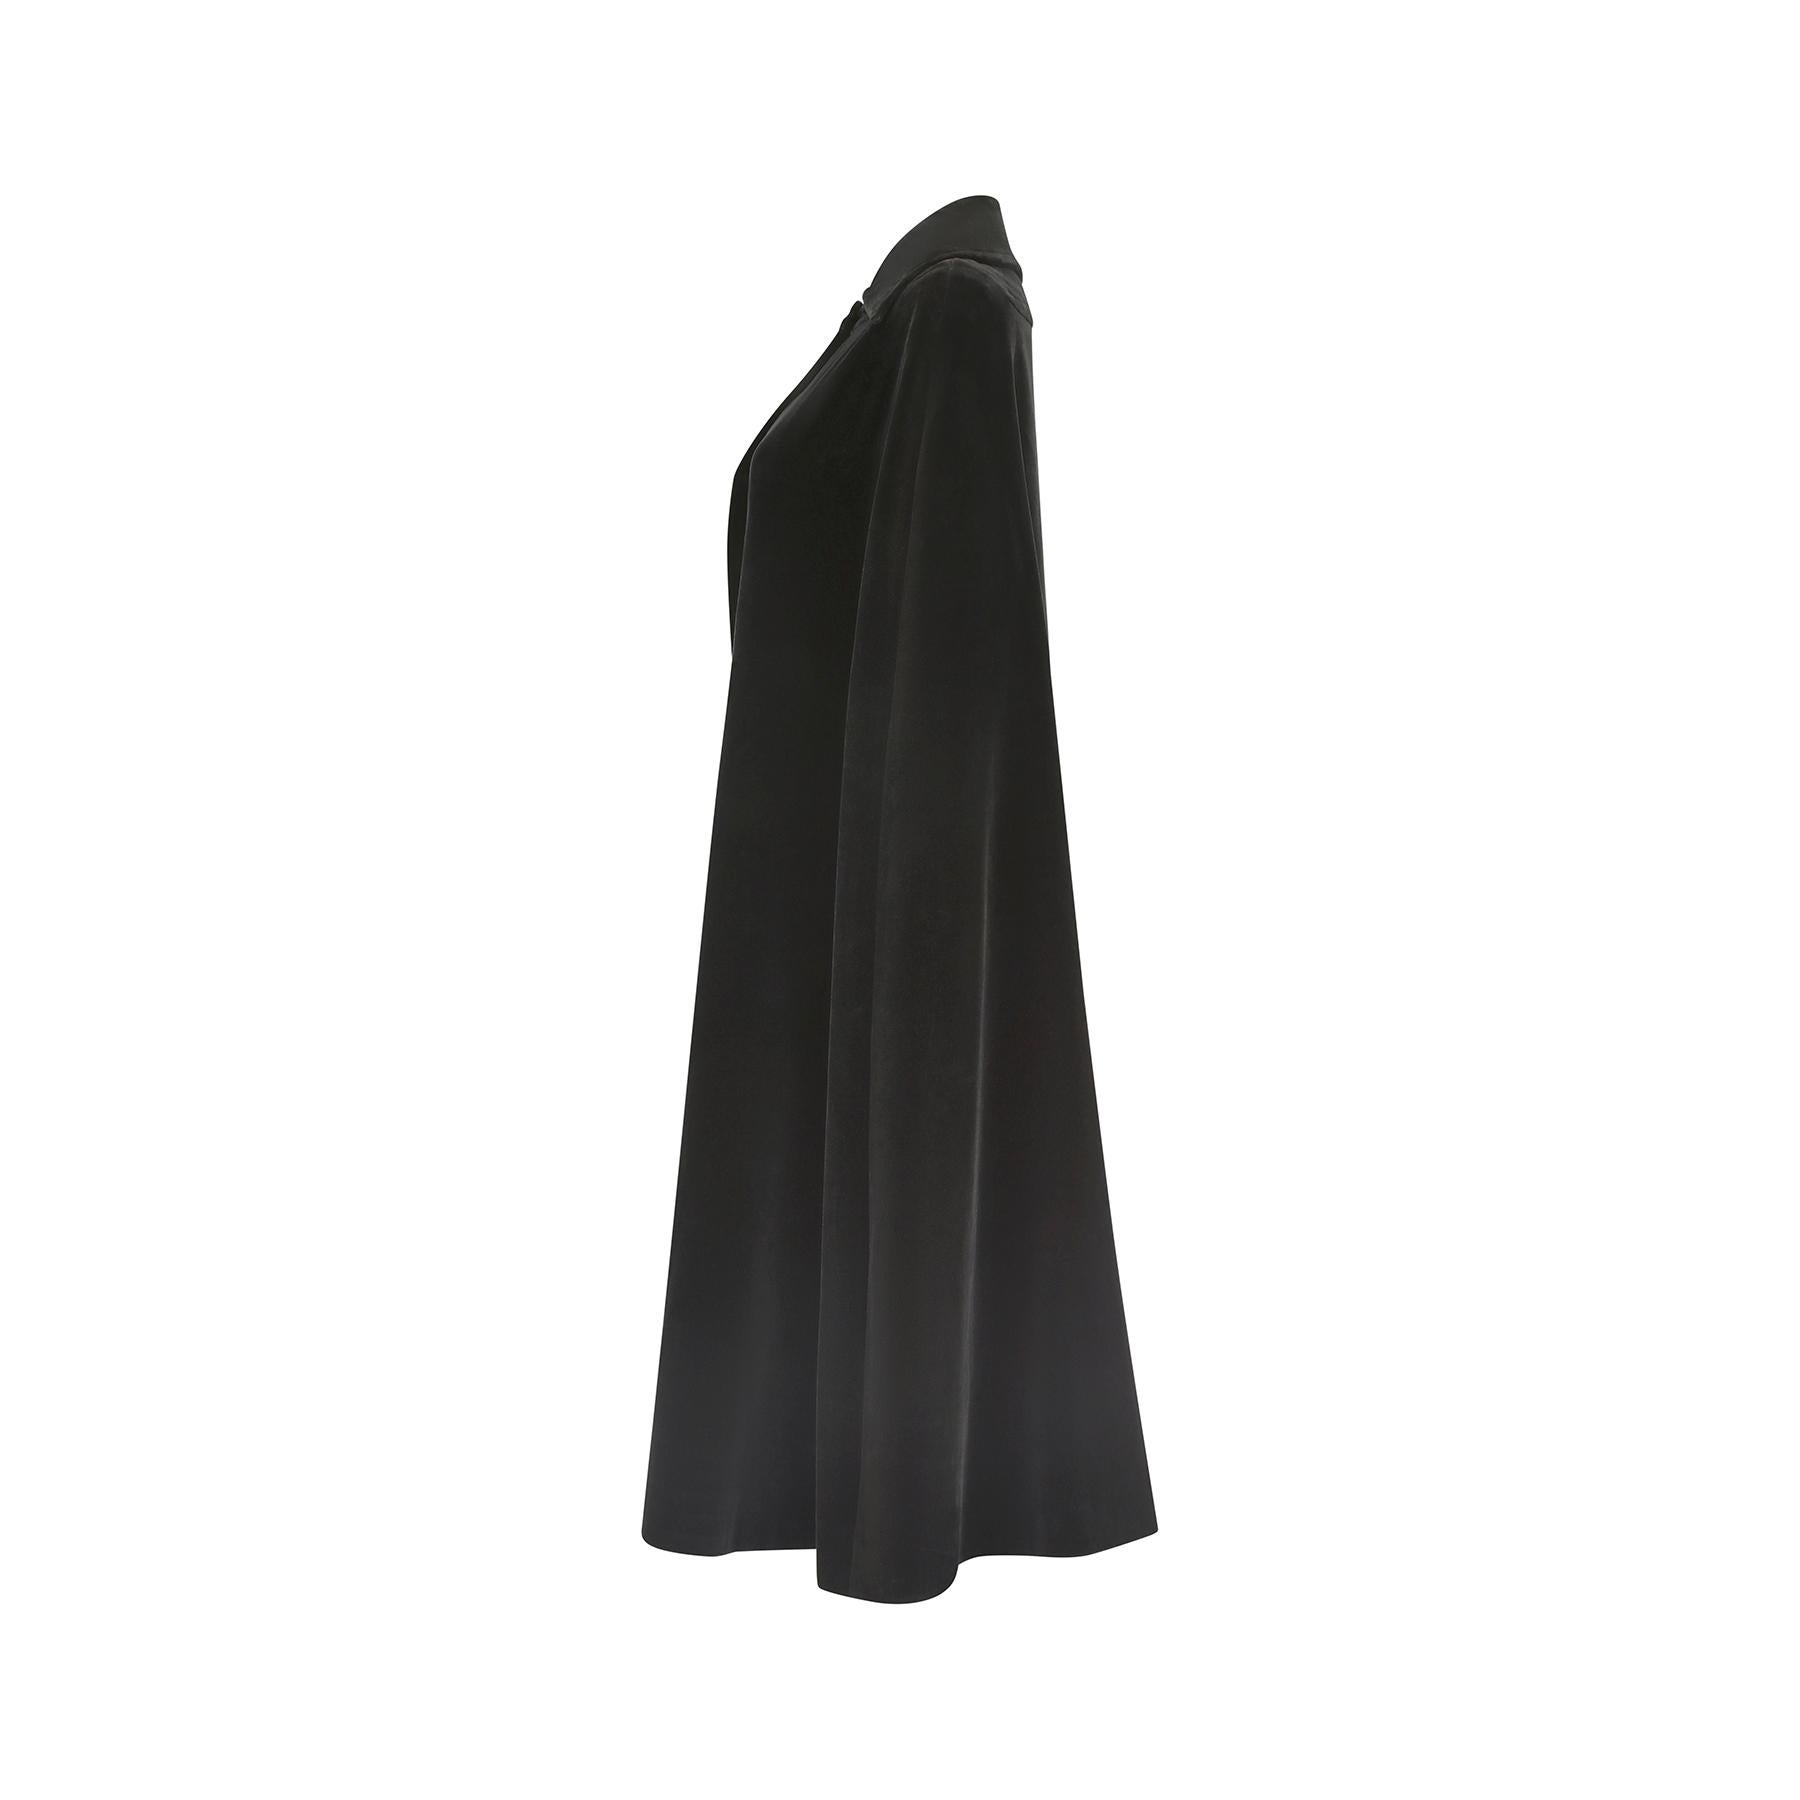 This late 1960s Diorling by Christian Dior cape is made from an incredibly thick and luxurious black velvet. It fastens at the collar with a popper closure and really evokes the chic silhouettes of the 60s, with capes often having been worn over